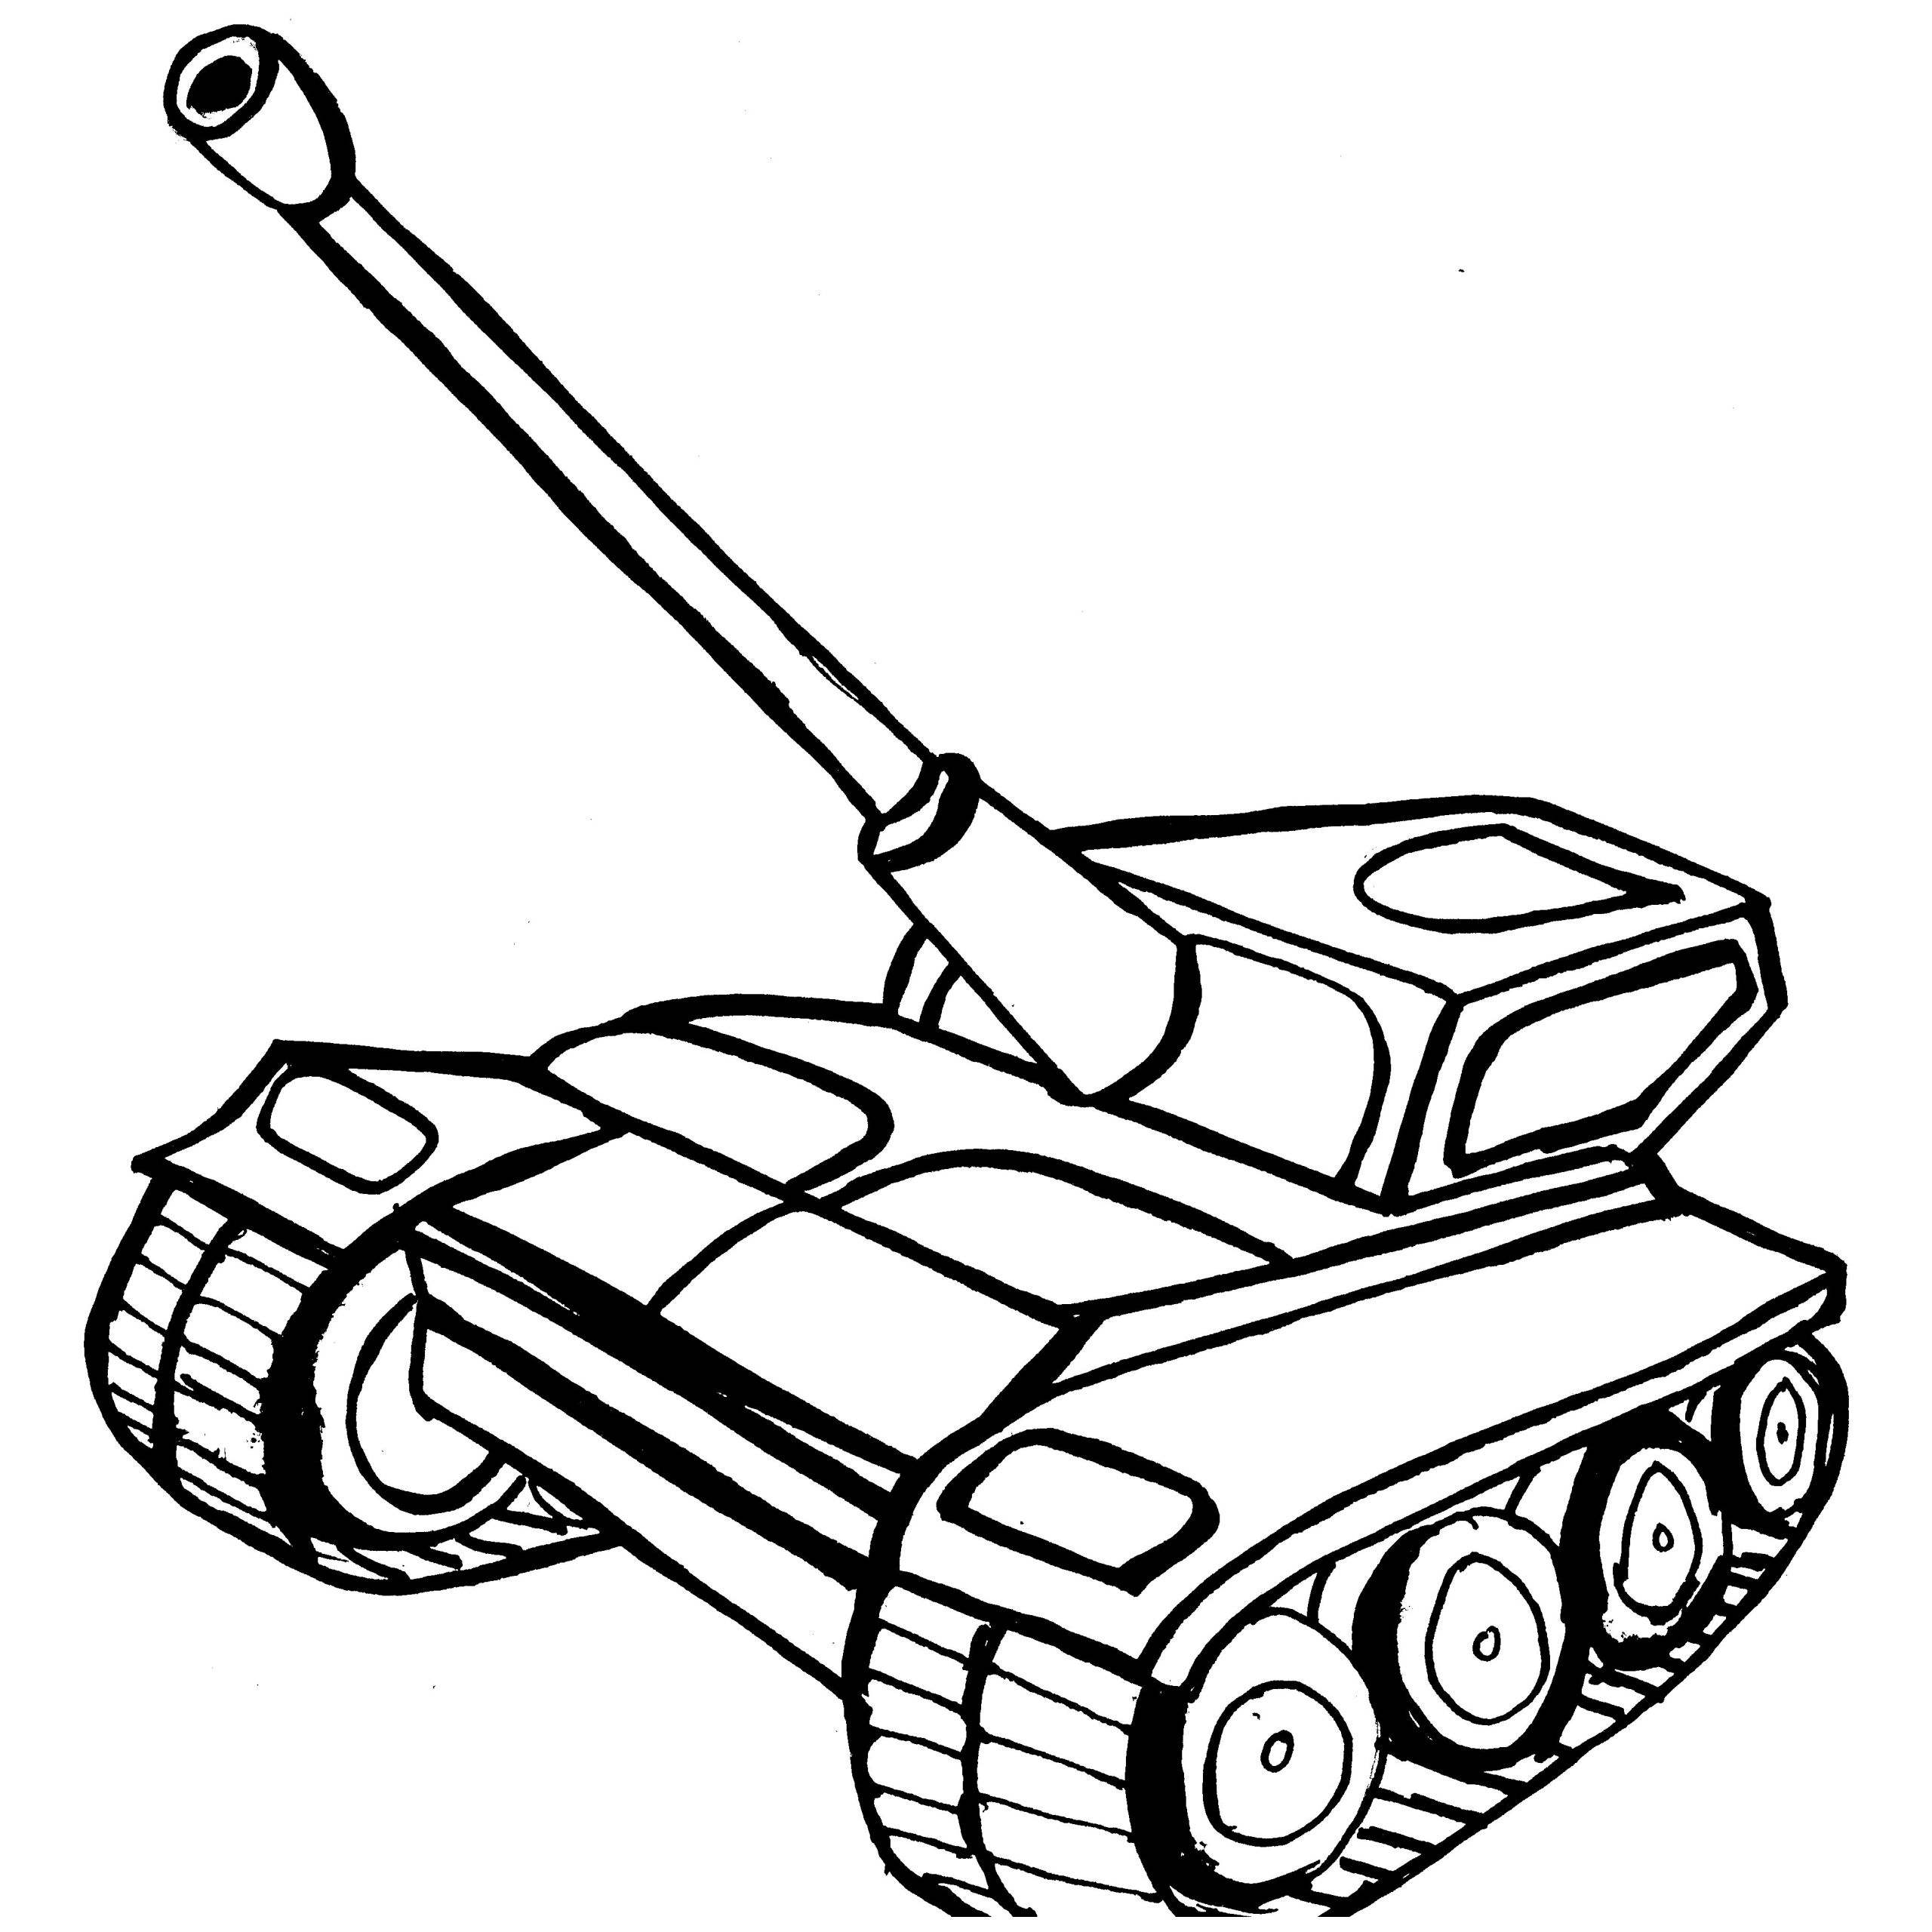 How to draw a military tank step by step - partnerlkak